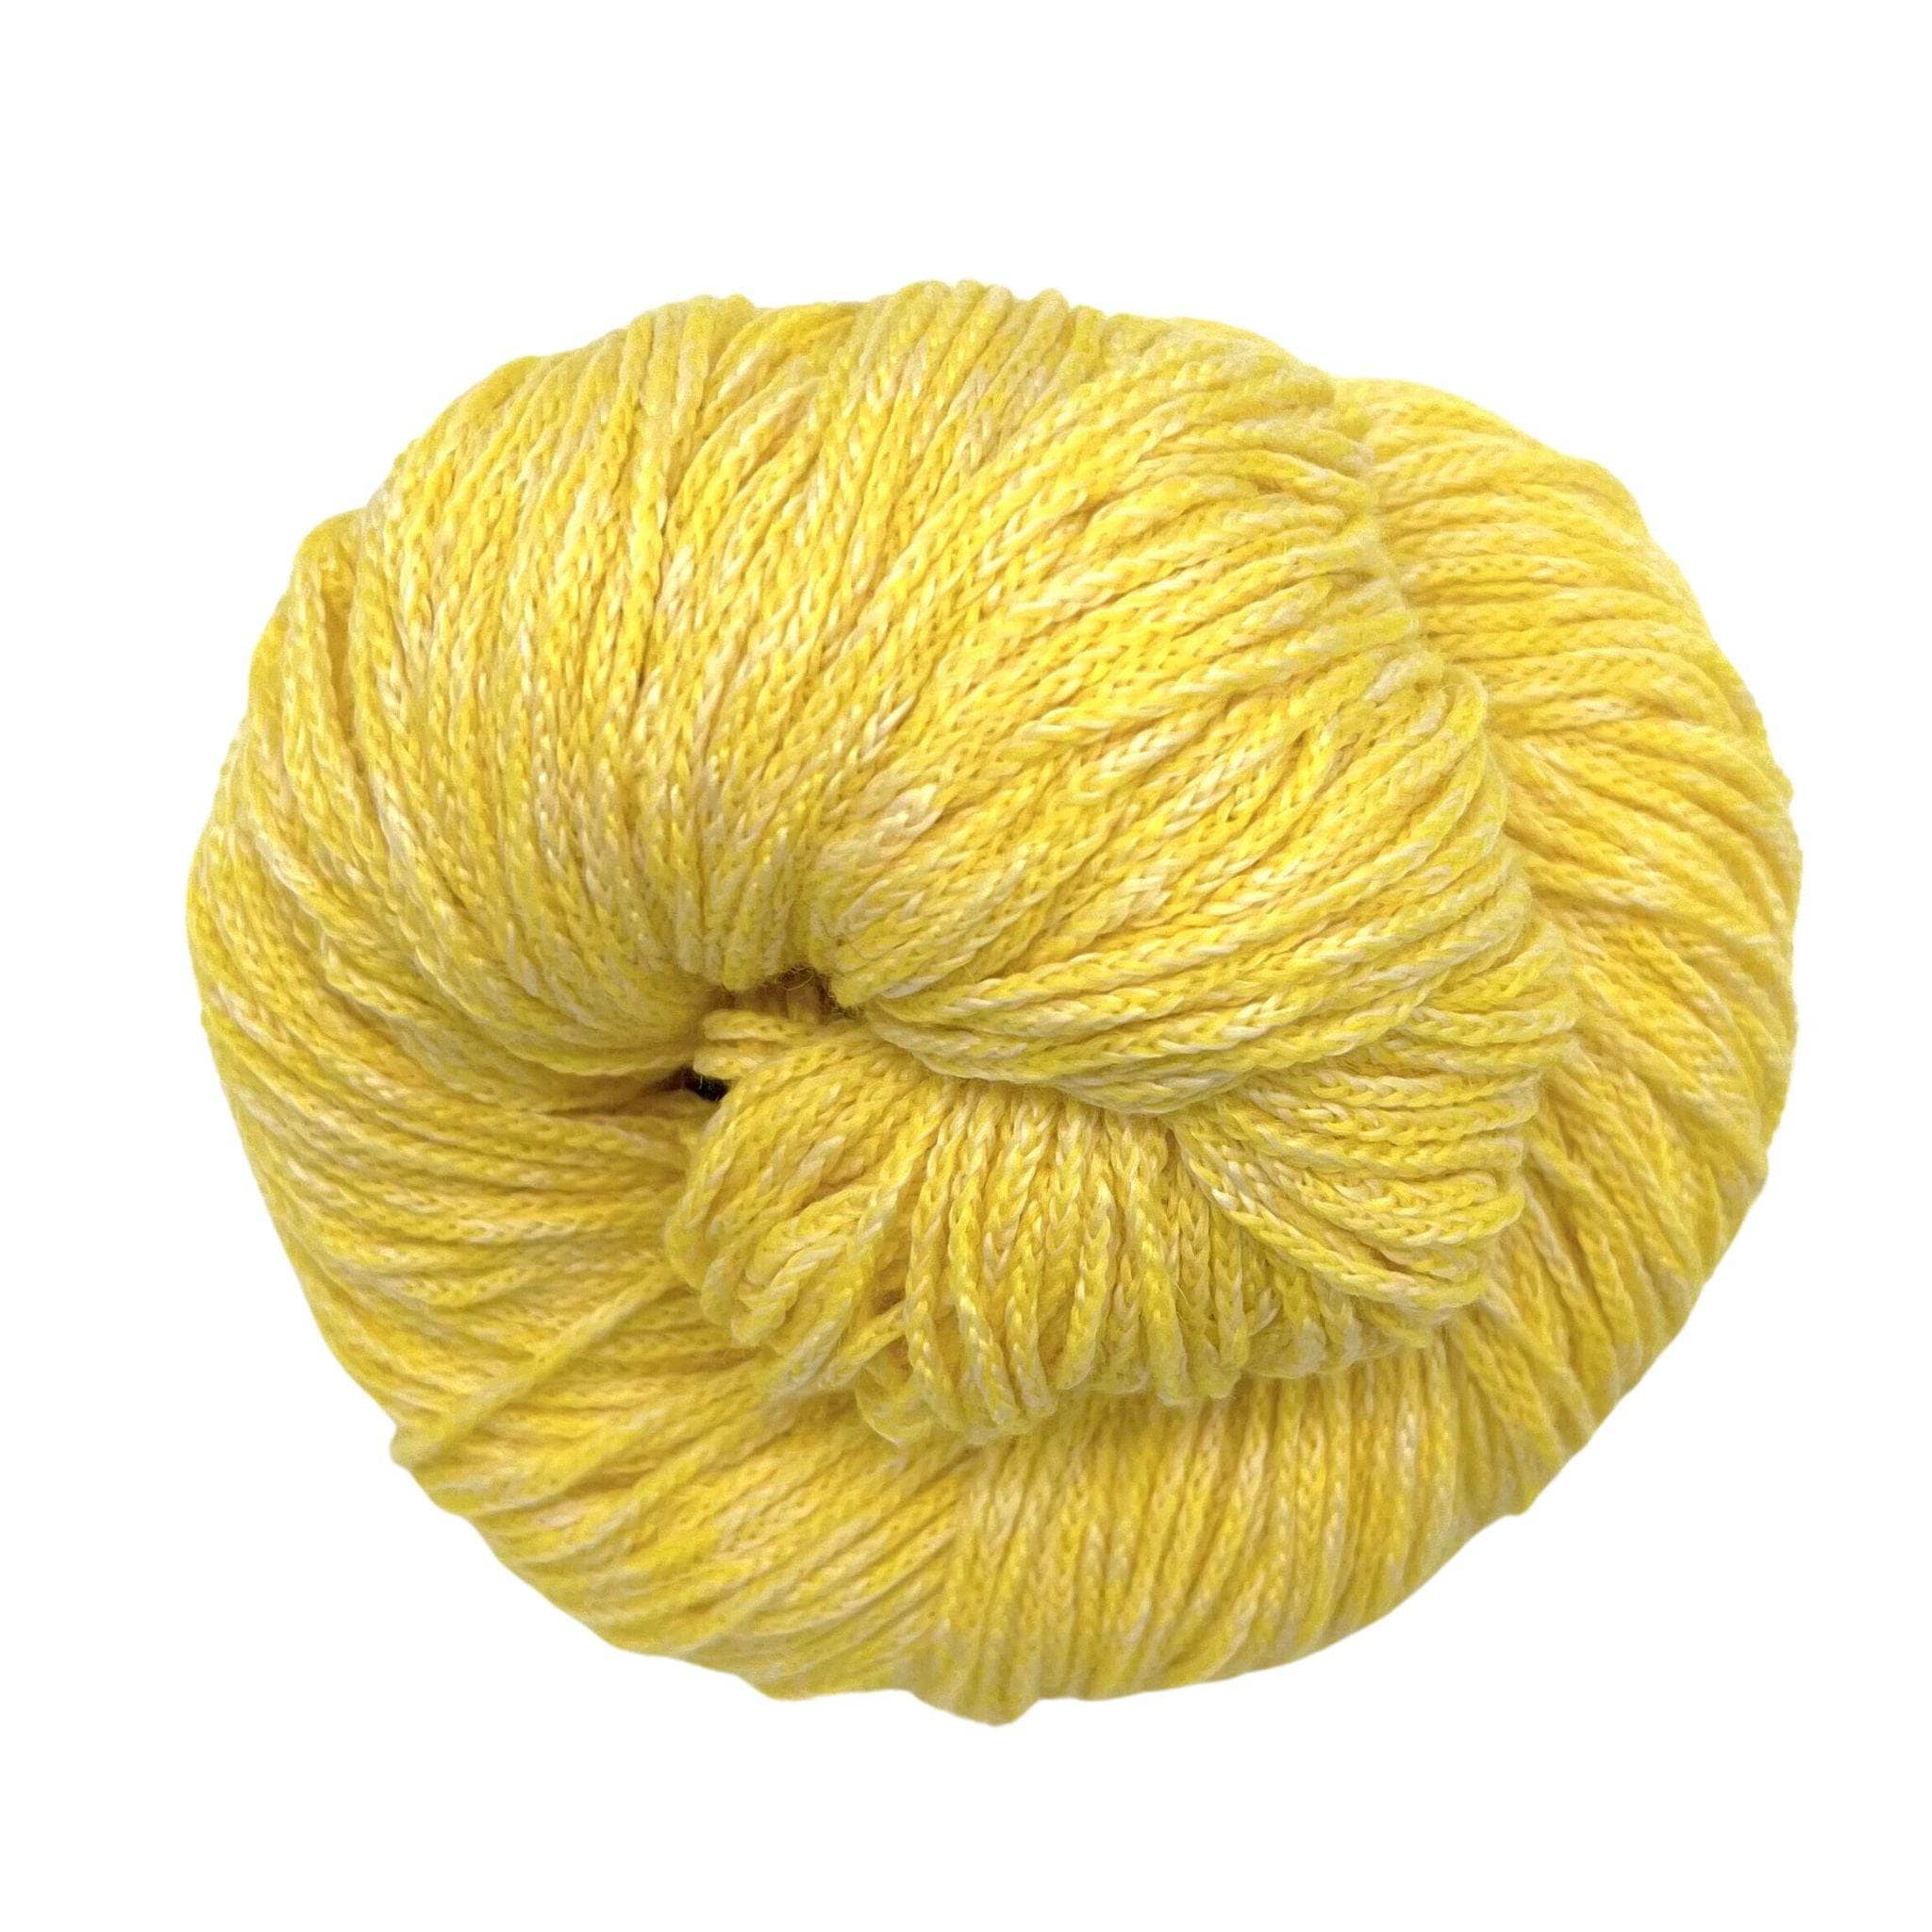  Knitting Yarn of Cotton, Viscose and Linen, Drops Belle, DK,  Light Worsted Weight, 1.8 oz 131 Yards (04 Dandelion)